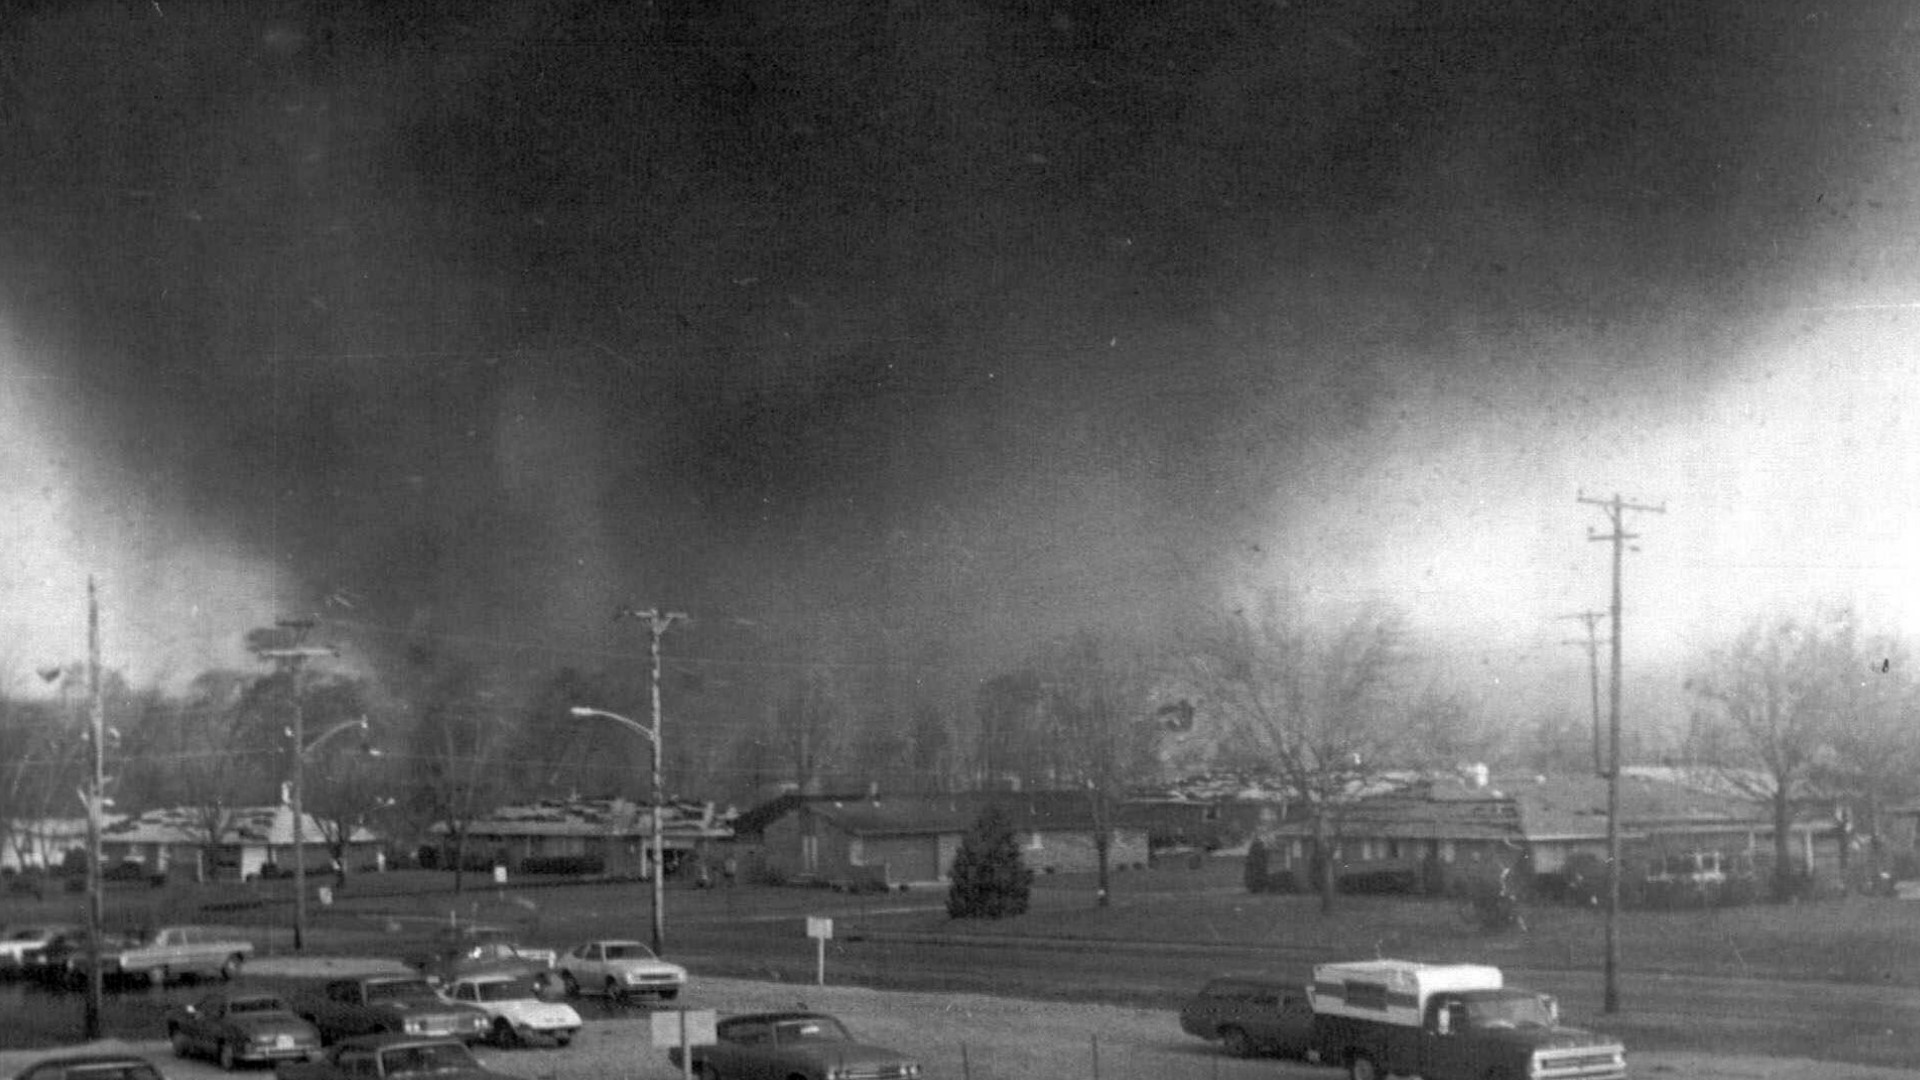 The Xenia tornado was the deadliest and most powerful of what was later labeled the 1974 Super Outbreak.